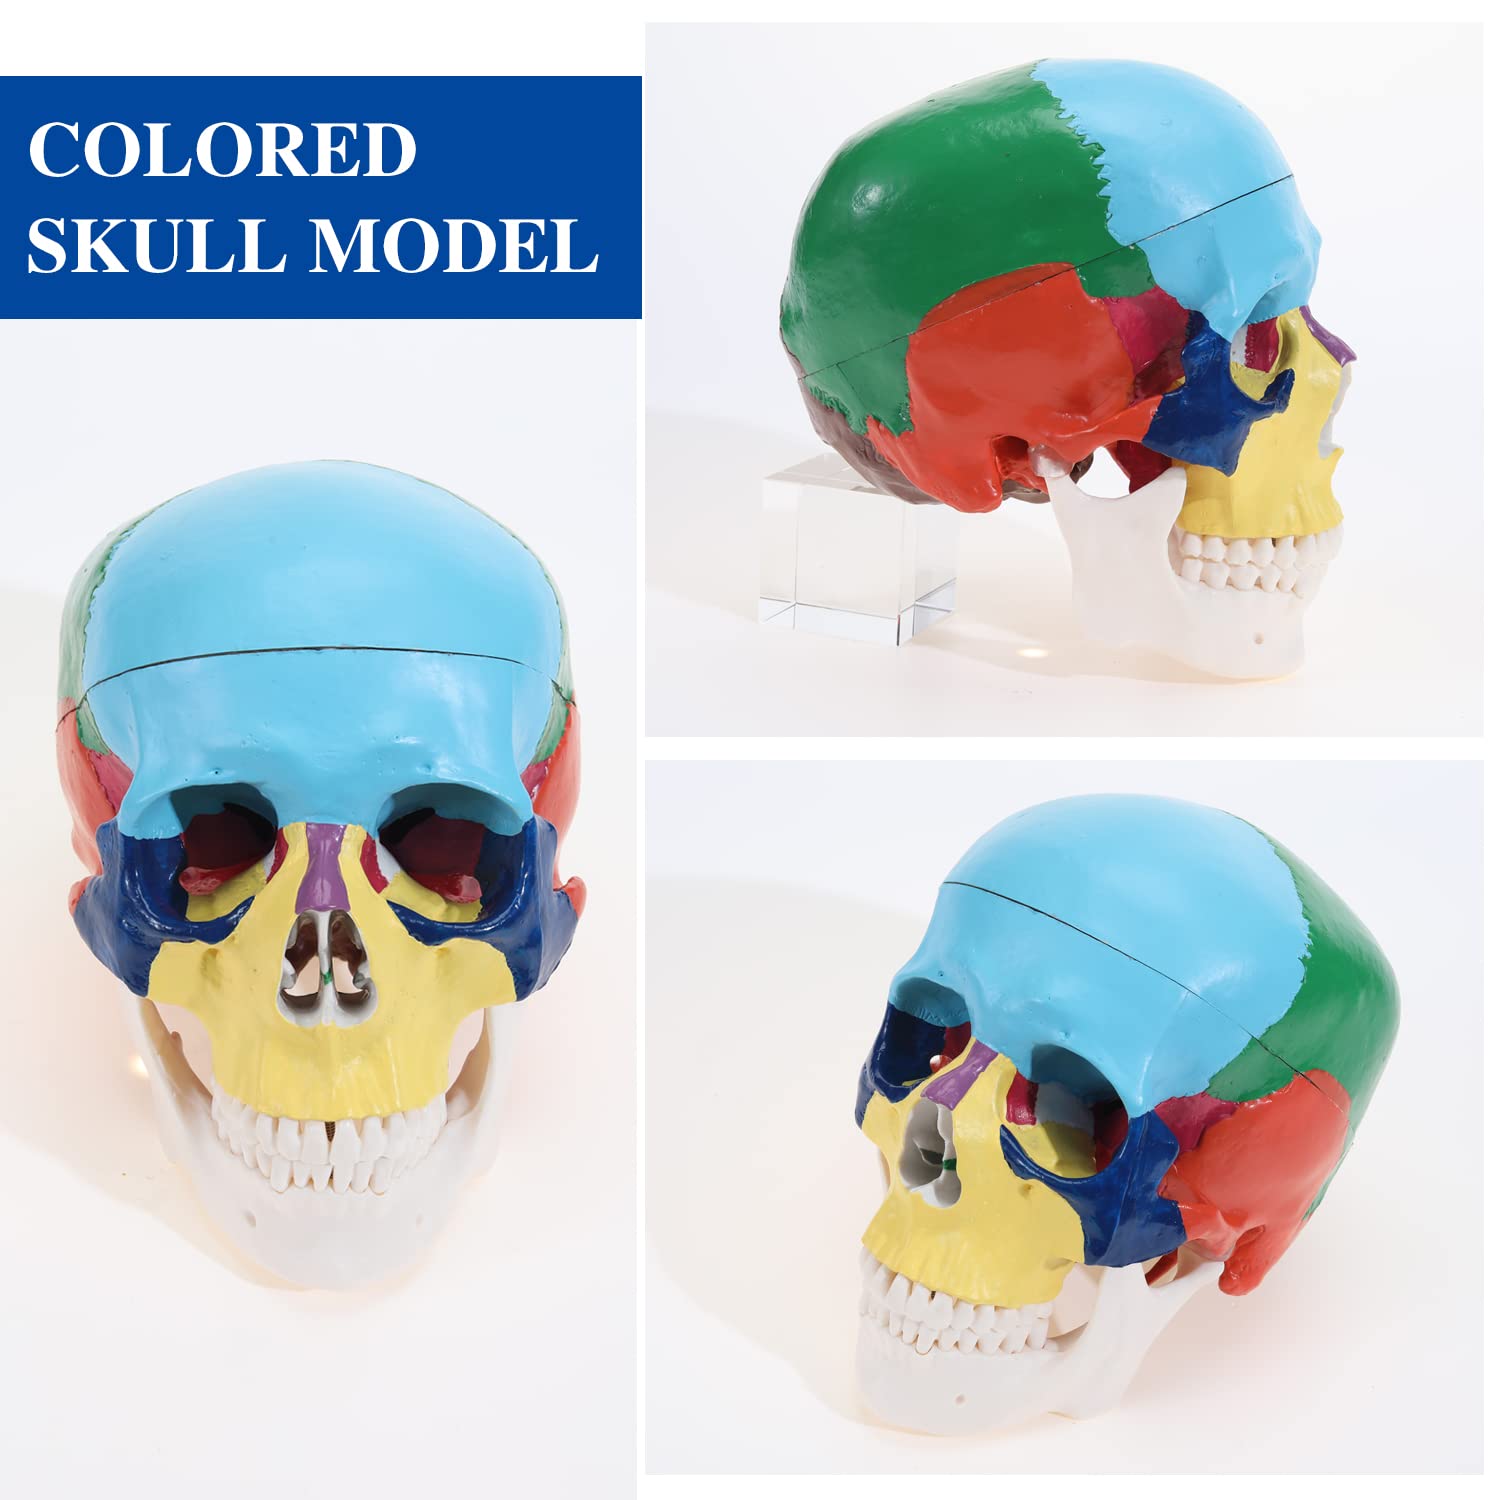 RONTEN Human Colored Skull Model Life Size 